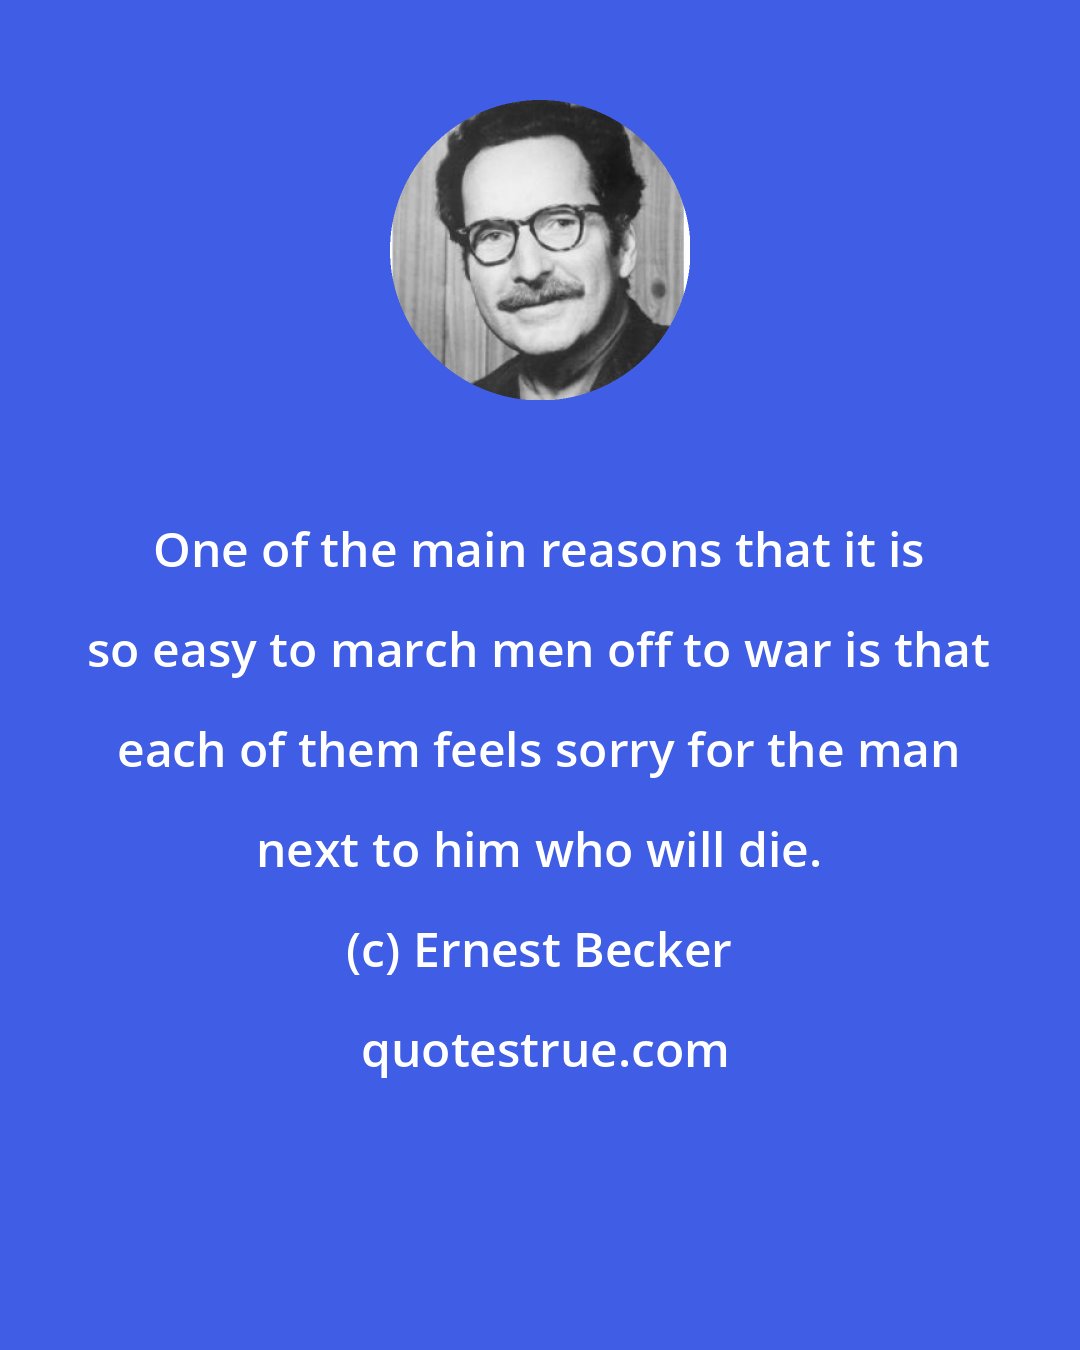 Ernest Becker: One of the main reasons that it is so easy to march men off to war is that each of them feels sorry for the man next to him who will die.